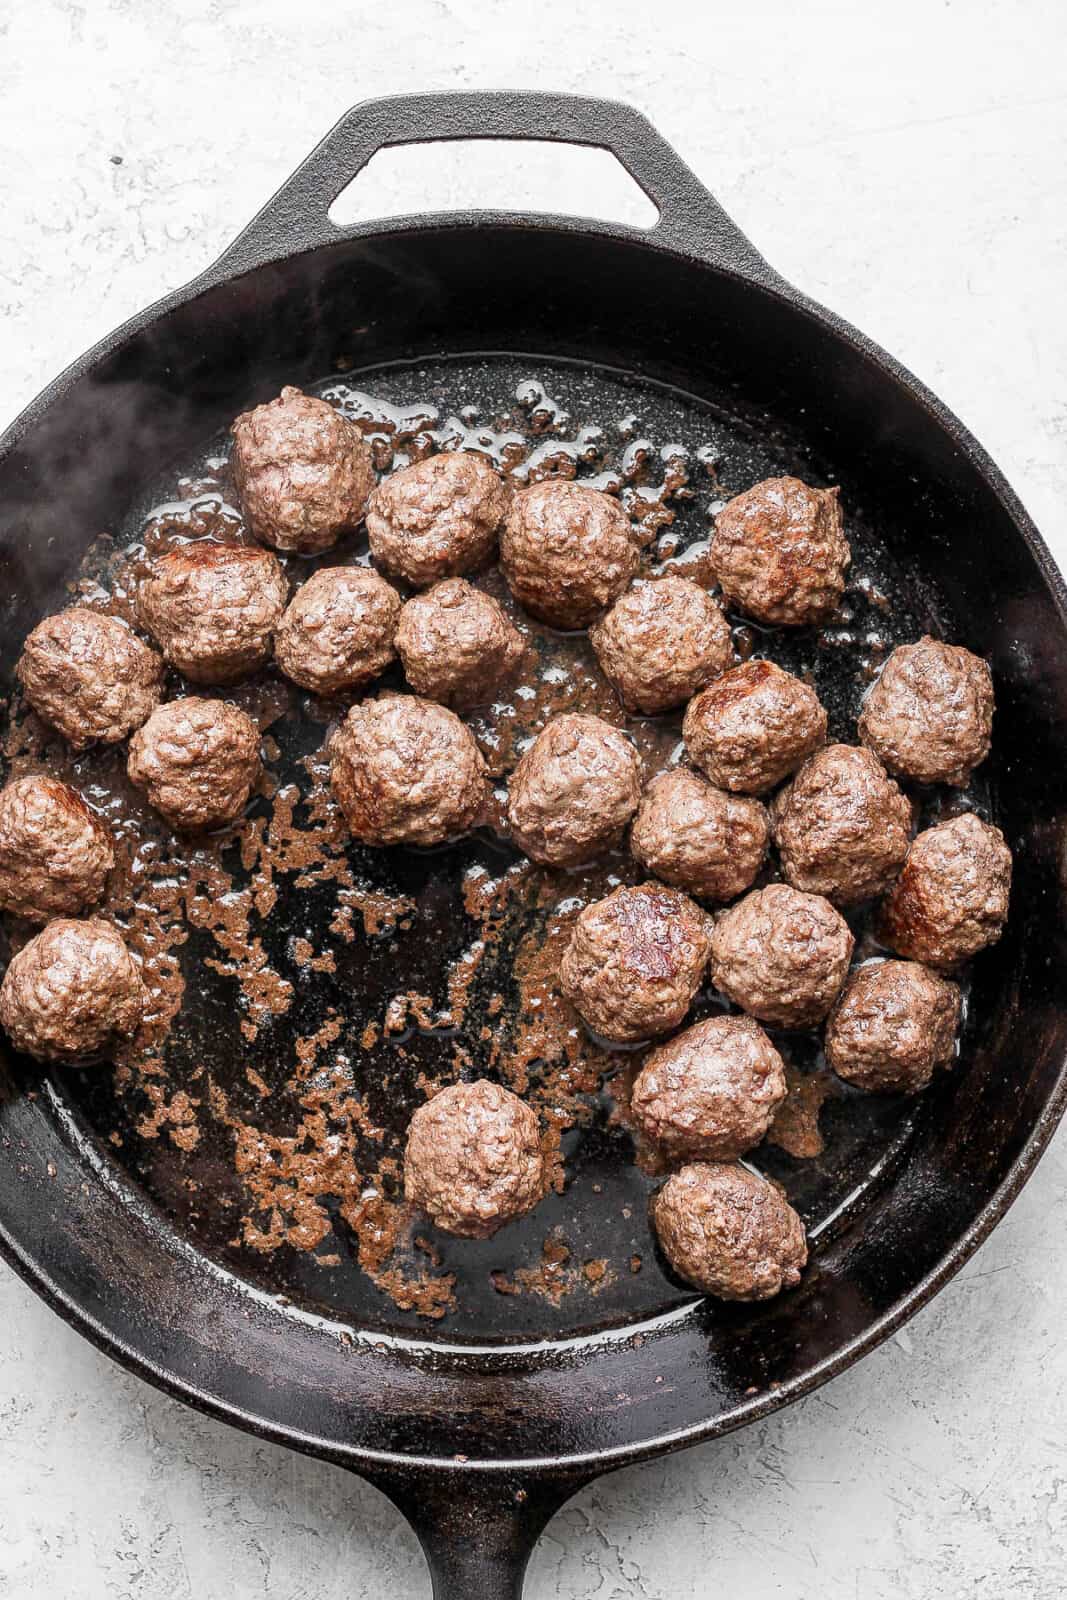 Meatballs cooking in a cast iron skillet.